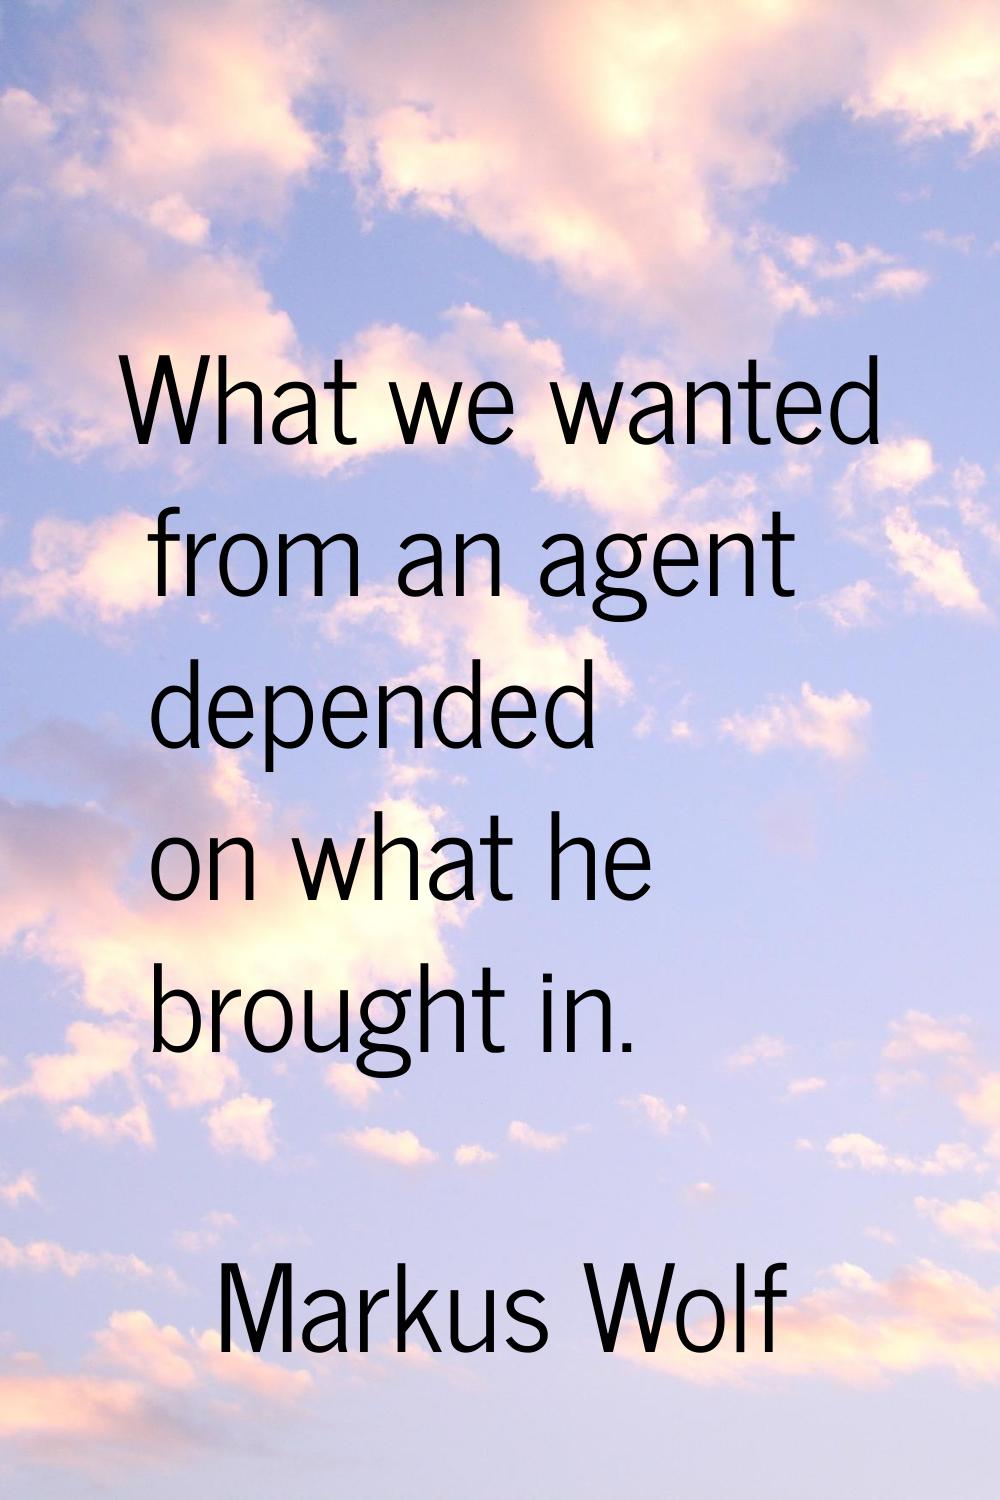 What we wanted from an agent depended on what he brought in.